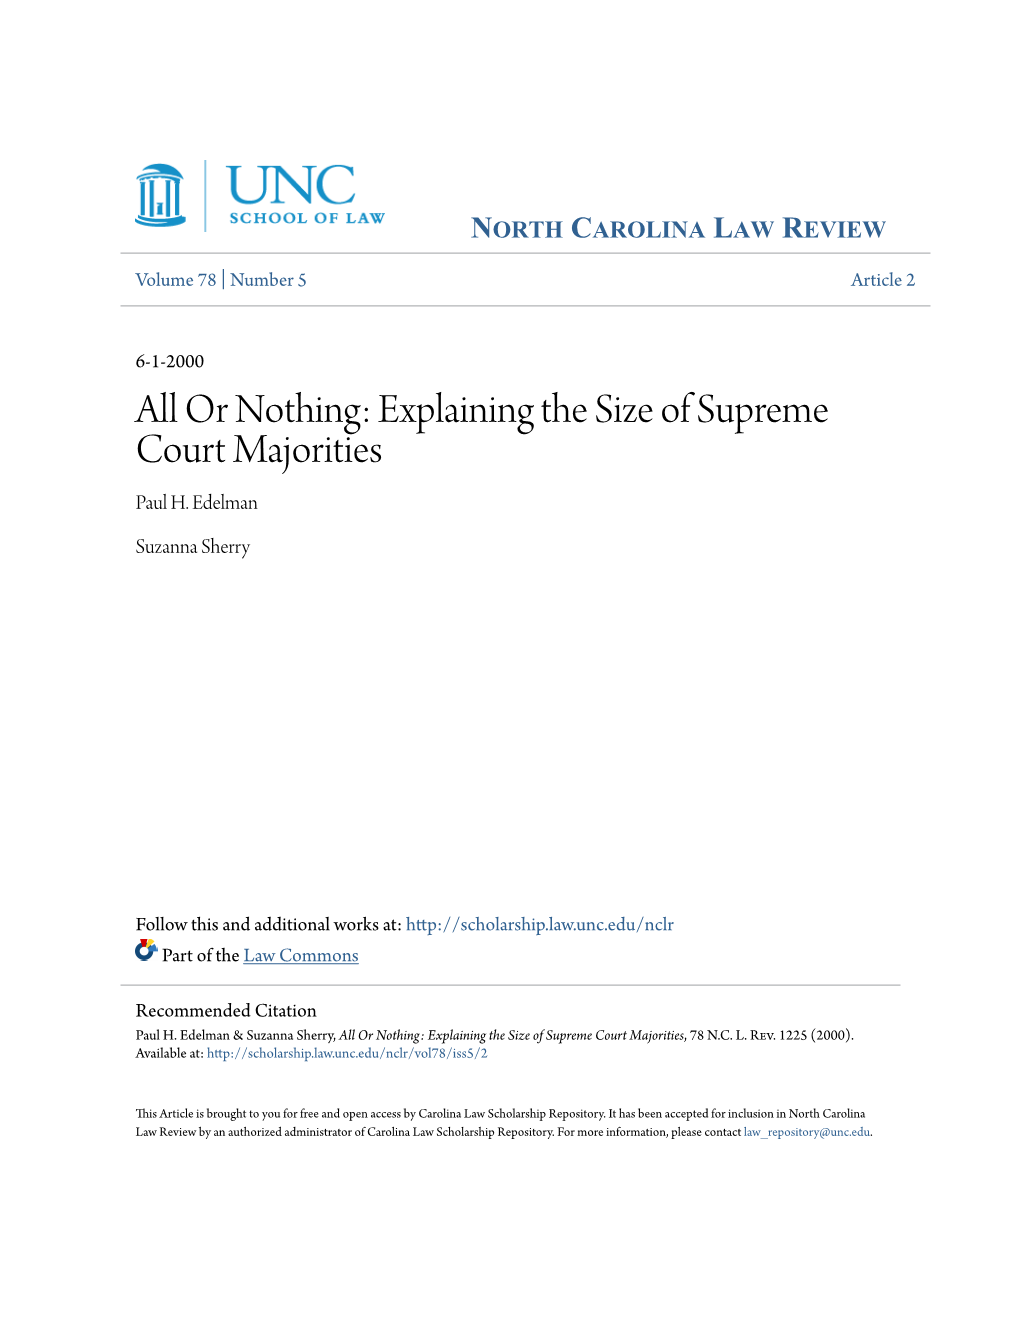 All Or Nothing: Explaining the Size of Supreme Court Majorities Paul H